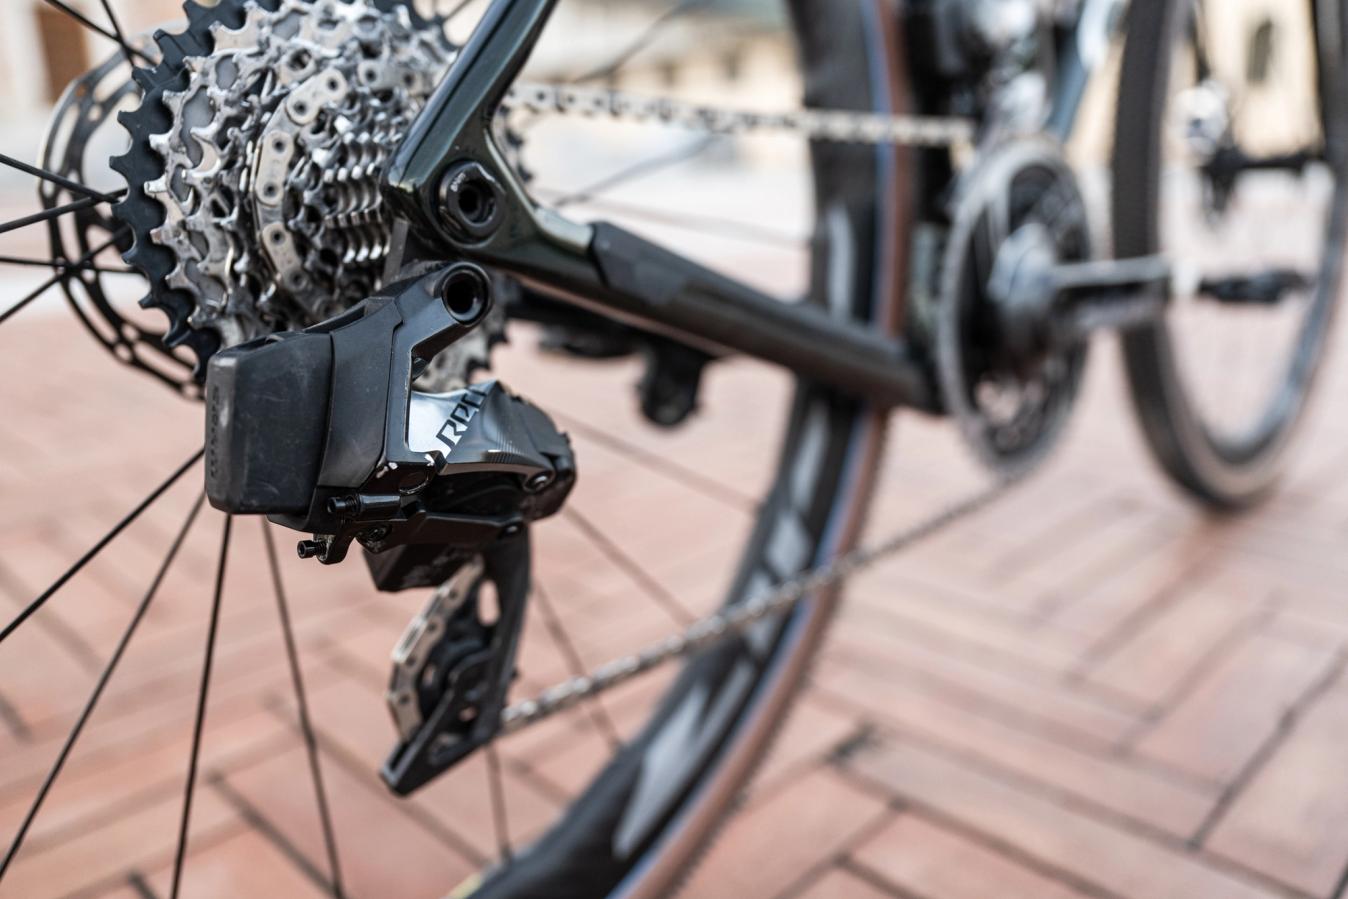 The large 10-36 cassette is the maximum size the SRAM Red groupset can accomodate